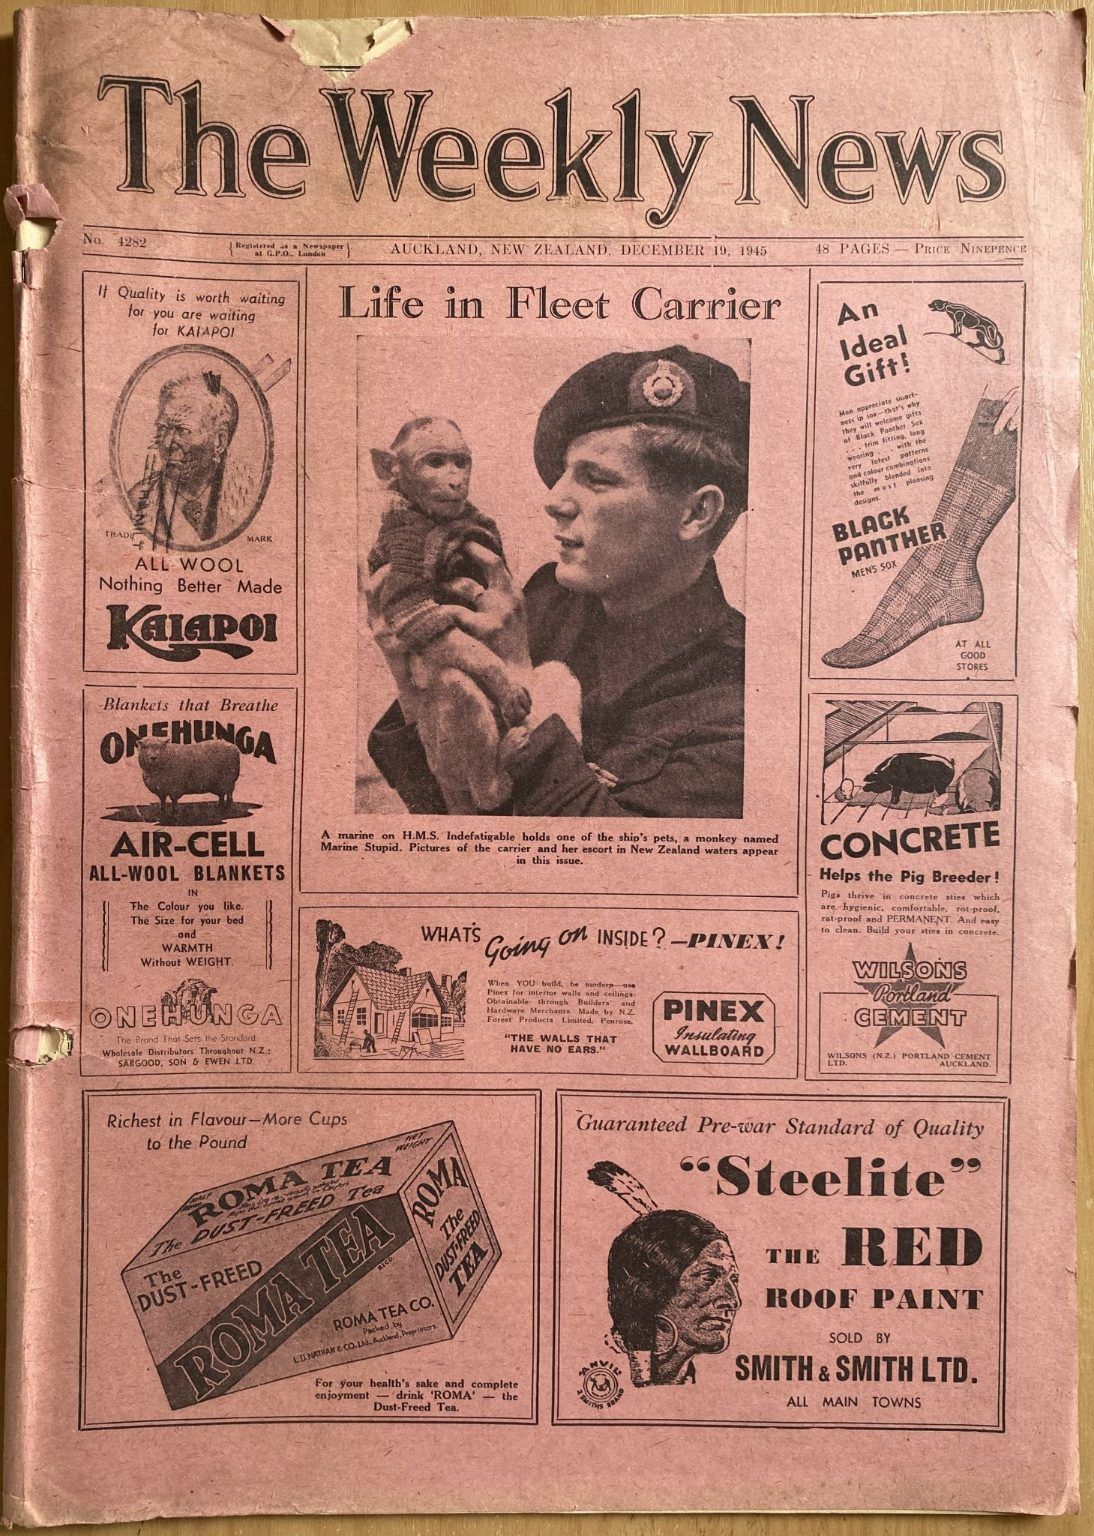 OLD NEWSPAPER: The Weekly News - No. 4282, 19 December 1945